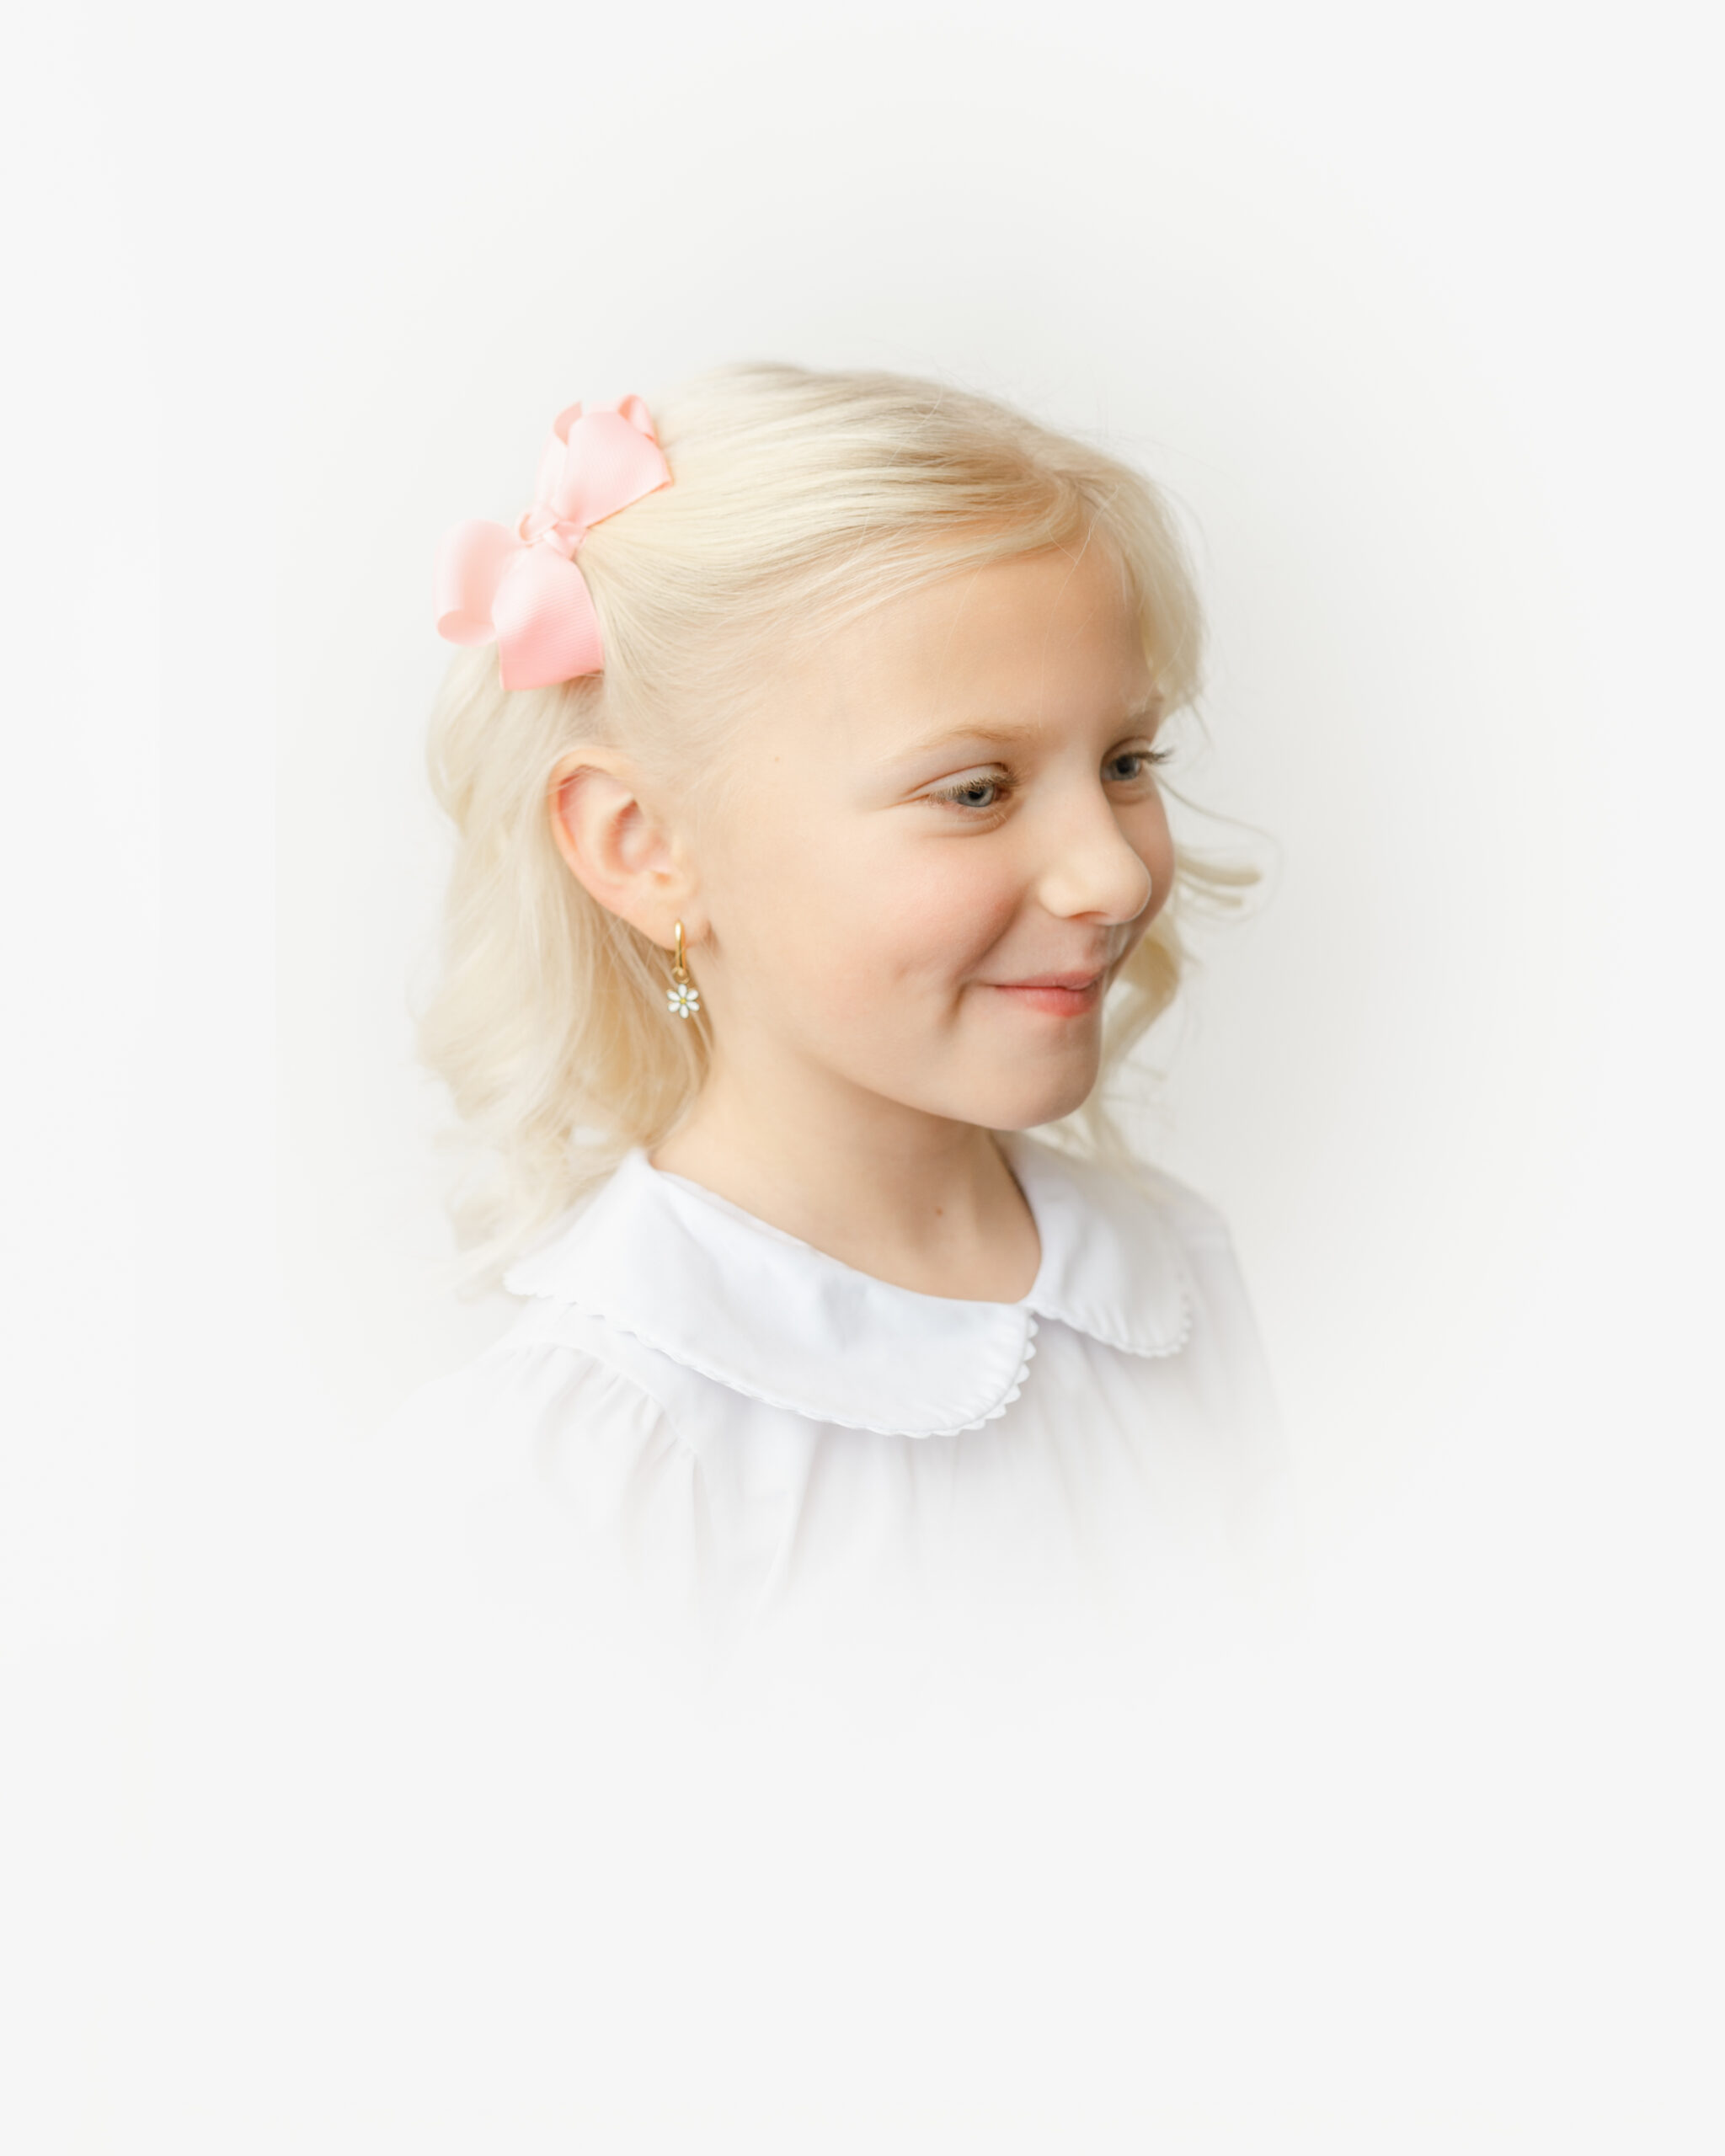 Little girl with bow looks off to the right during her heirloom vignette portrait.